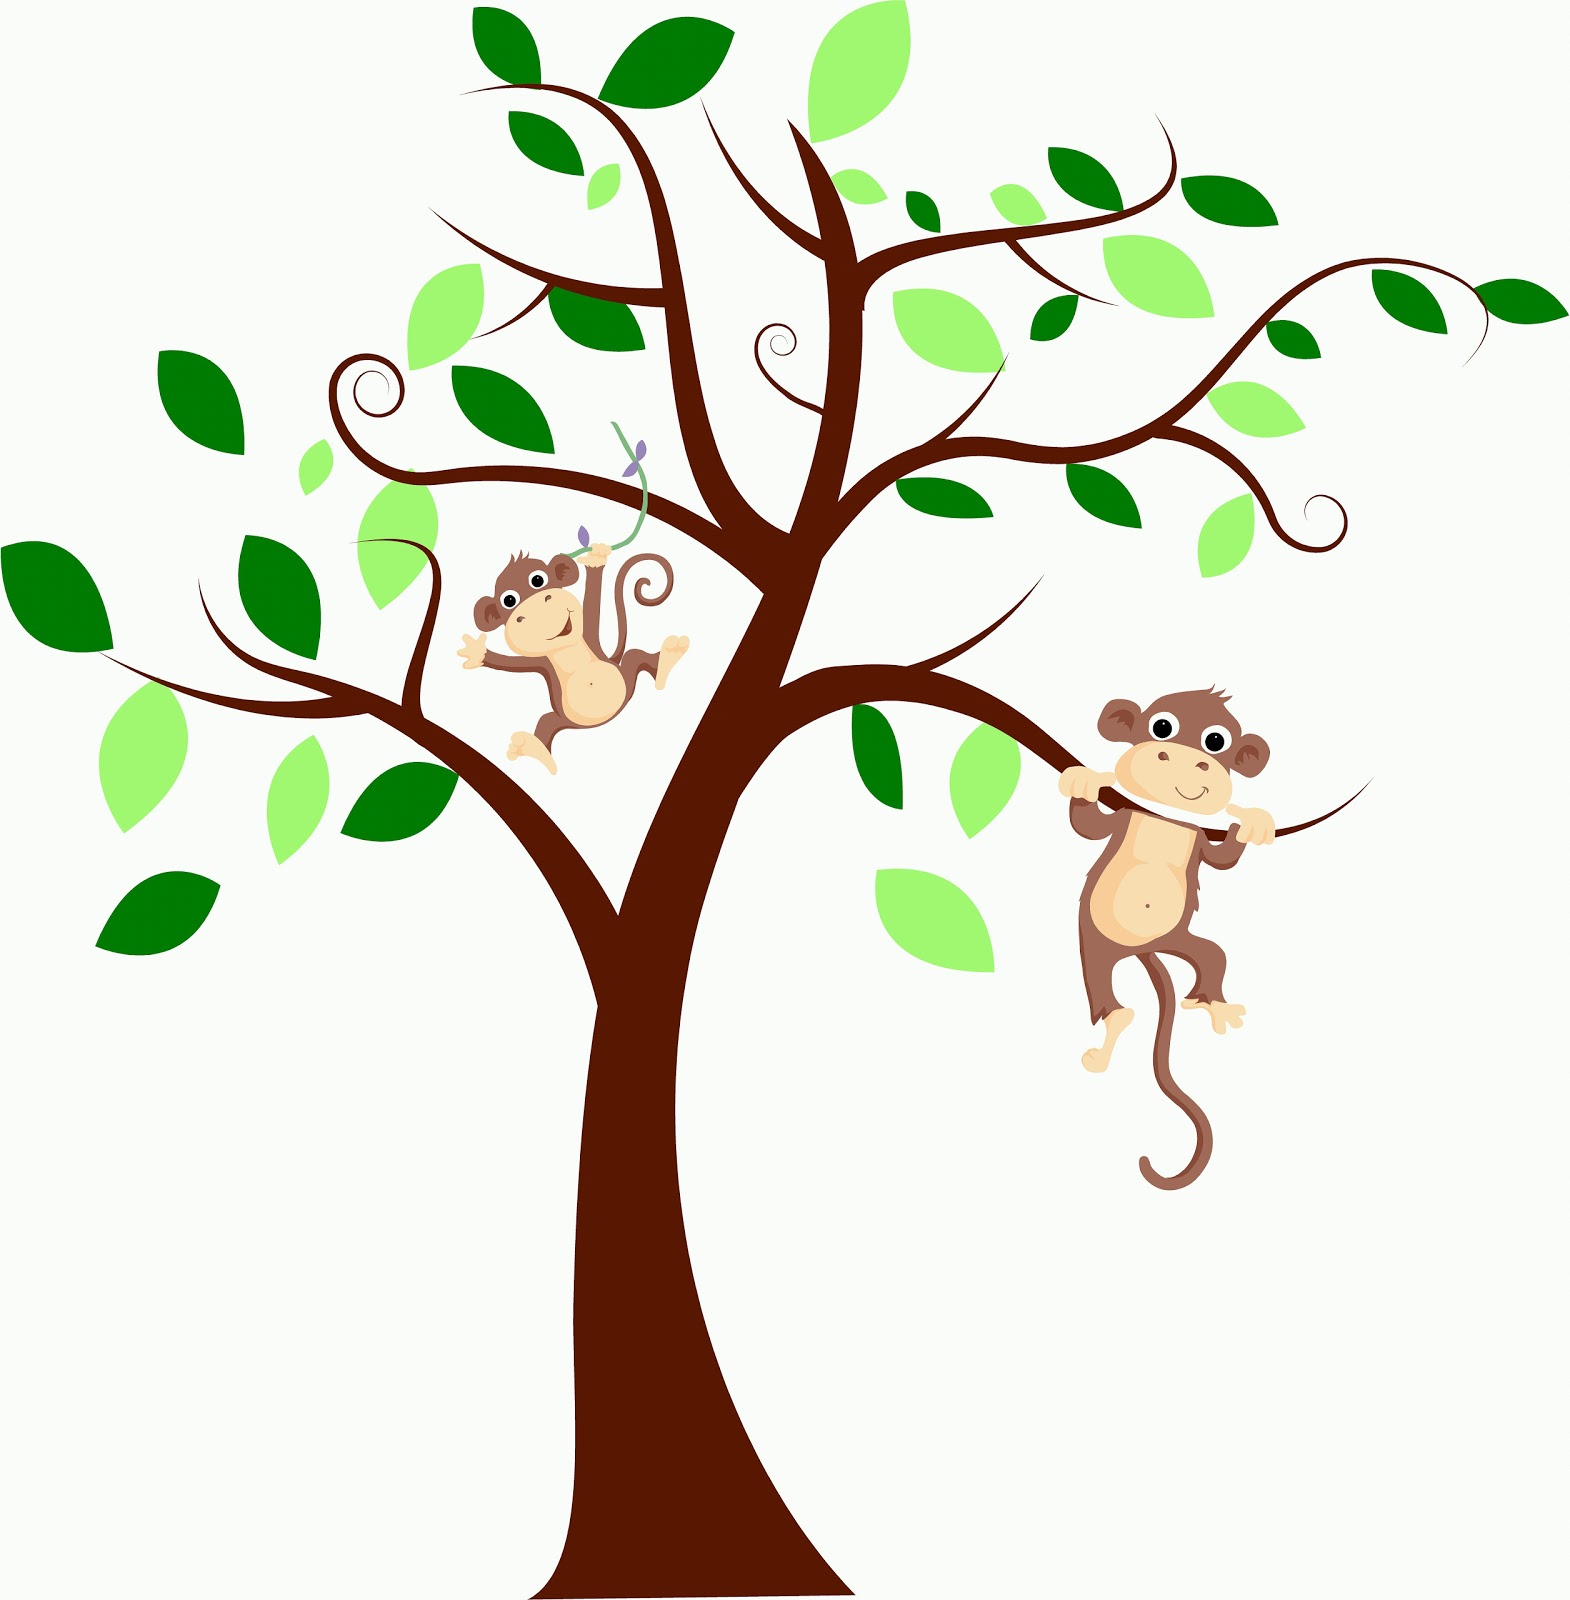 monkey in a tree clipart - photo #2